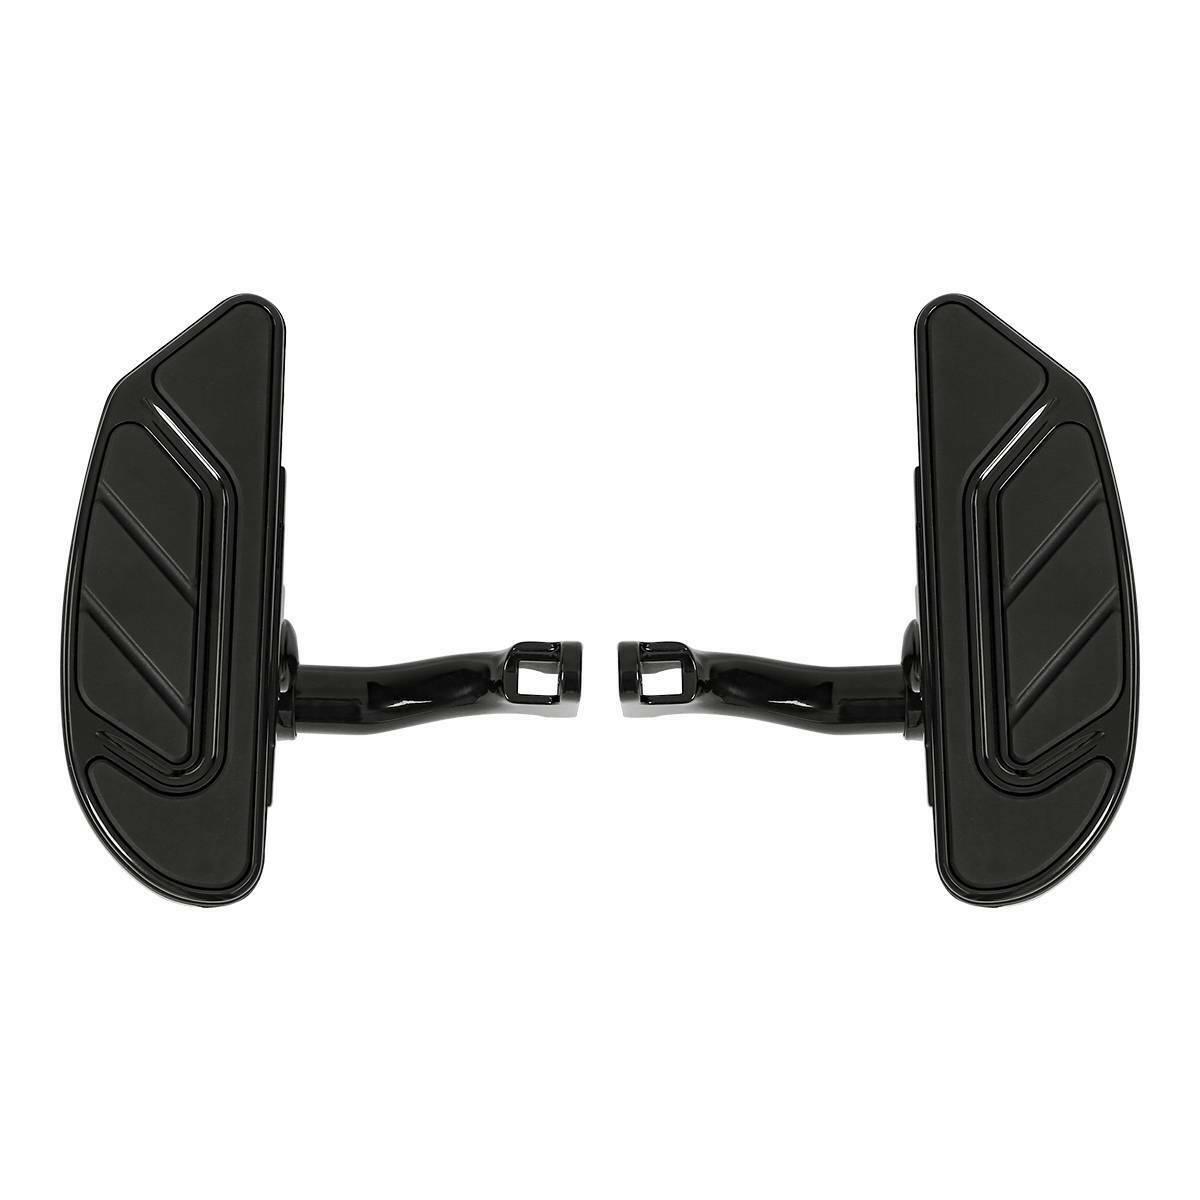 Airflow Rear Passenger Floorboard Fit For Harley Touring Road Street Glide 93-21 - Moto Life Products